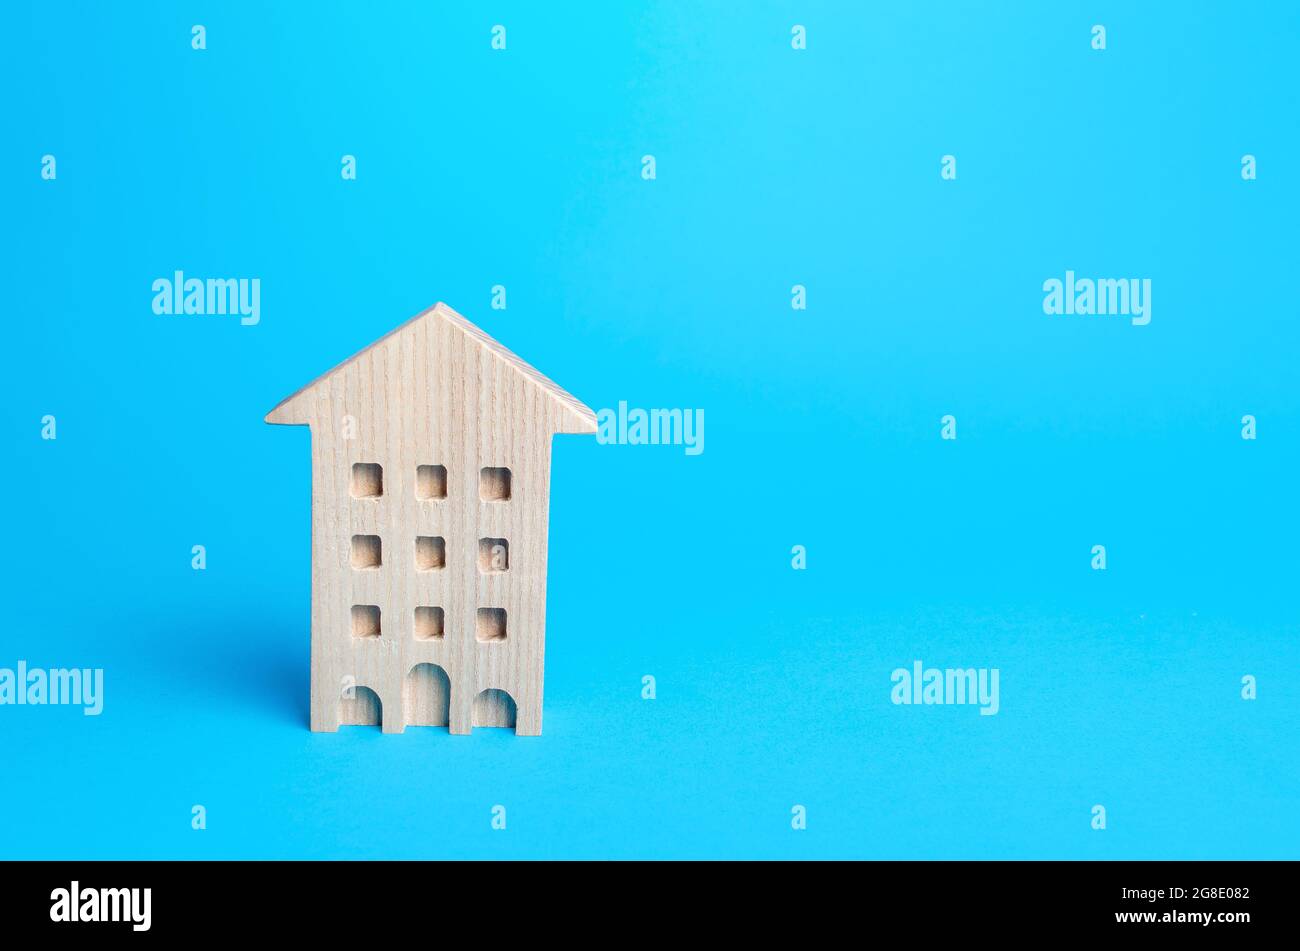 Wooden multi-storey house on a blue background. Buying and selling real estate. Housing, realtor services. Renovation and home improvement. Mortgage l Stock Photo